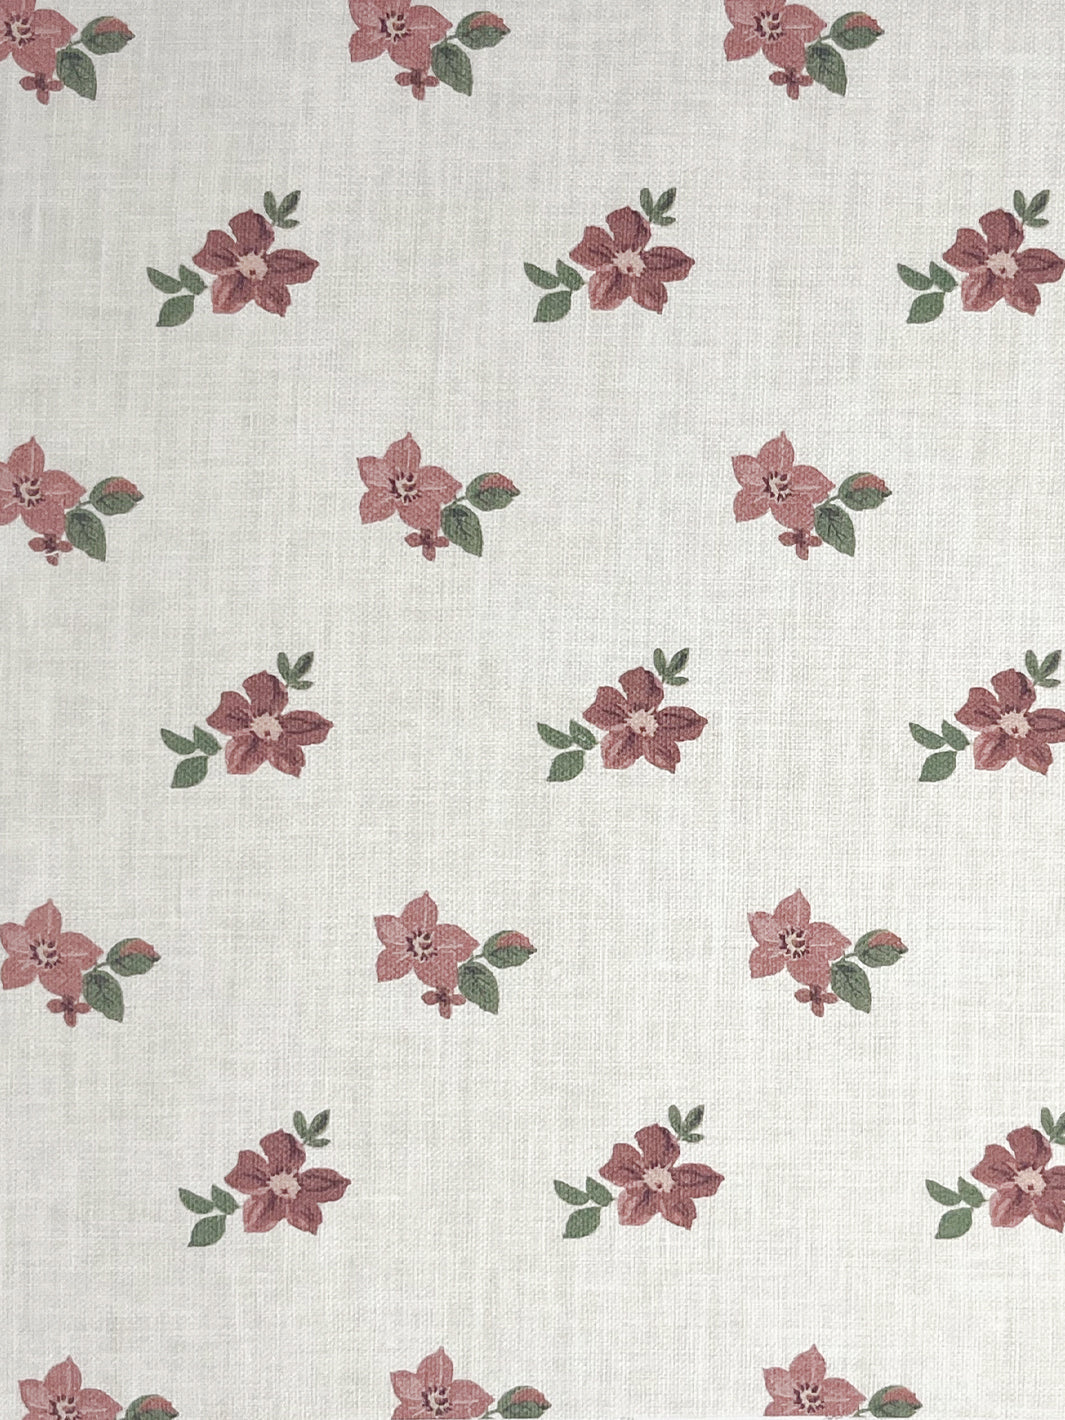 'Anna Floral' Linen Fabric by Nathan Turner - Pink Green